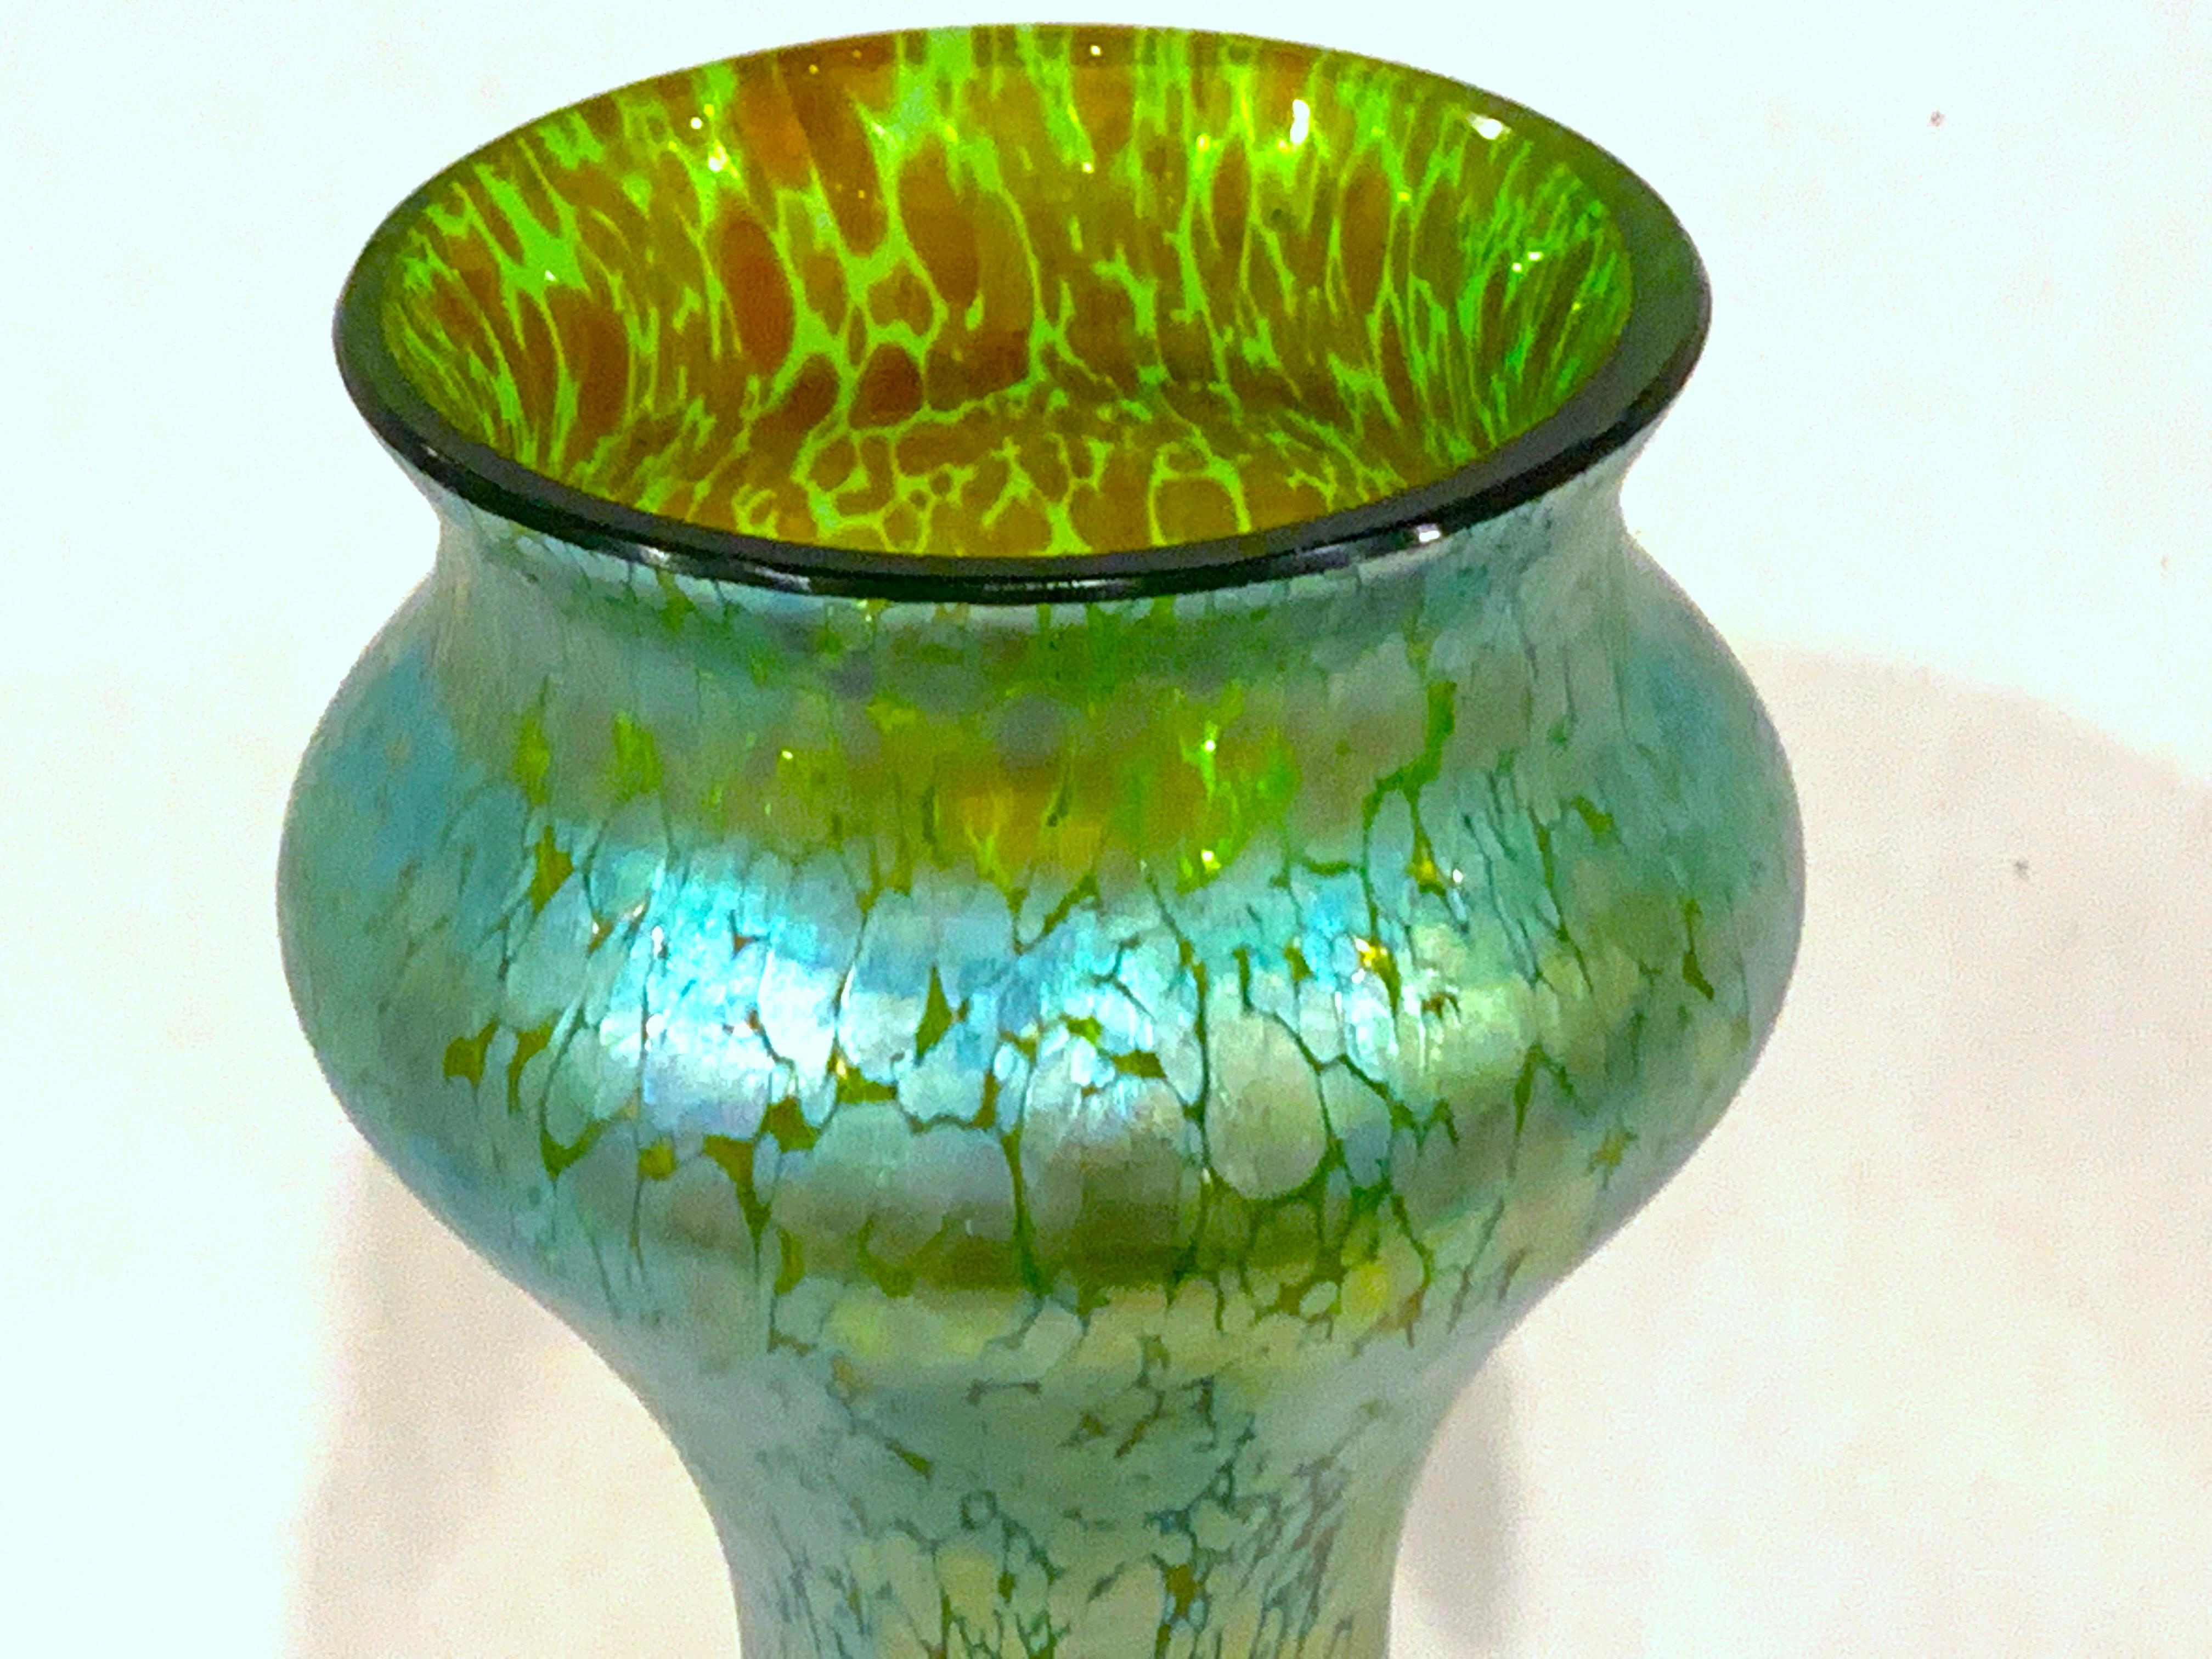 Loetz oil spot vase with blue-green iridescent finish, Unsigned.